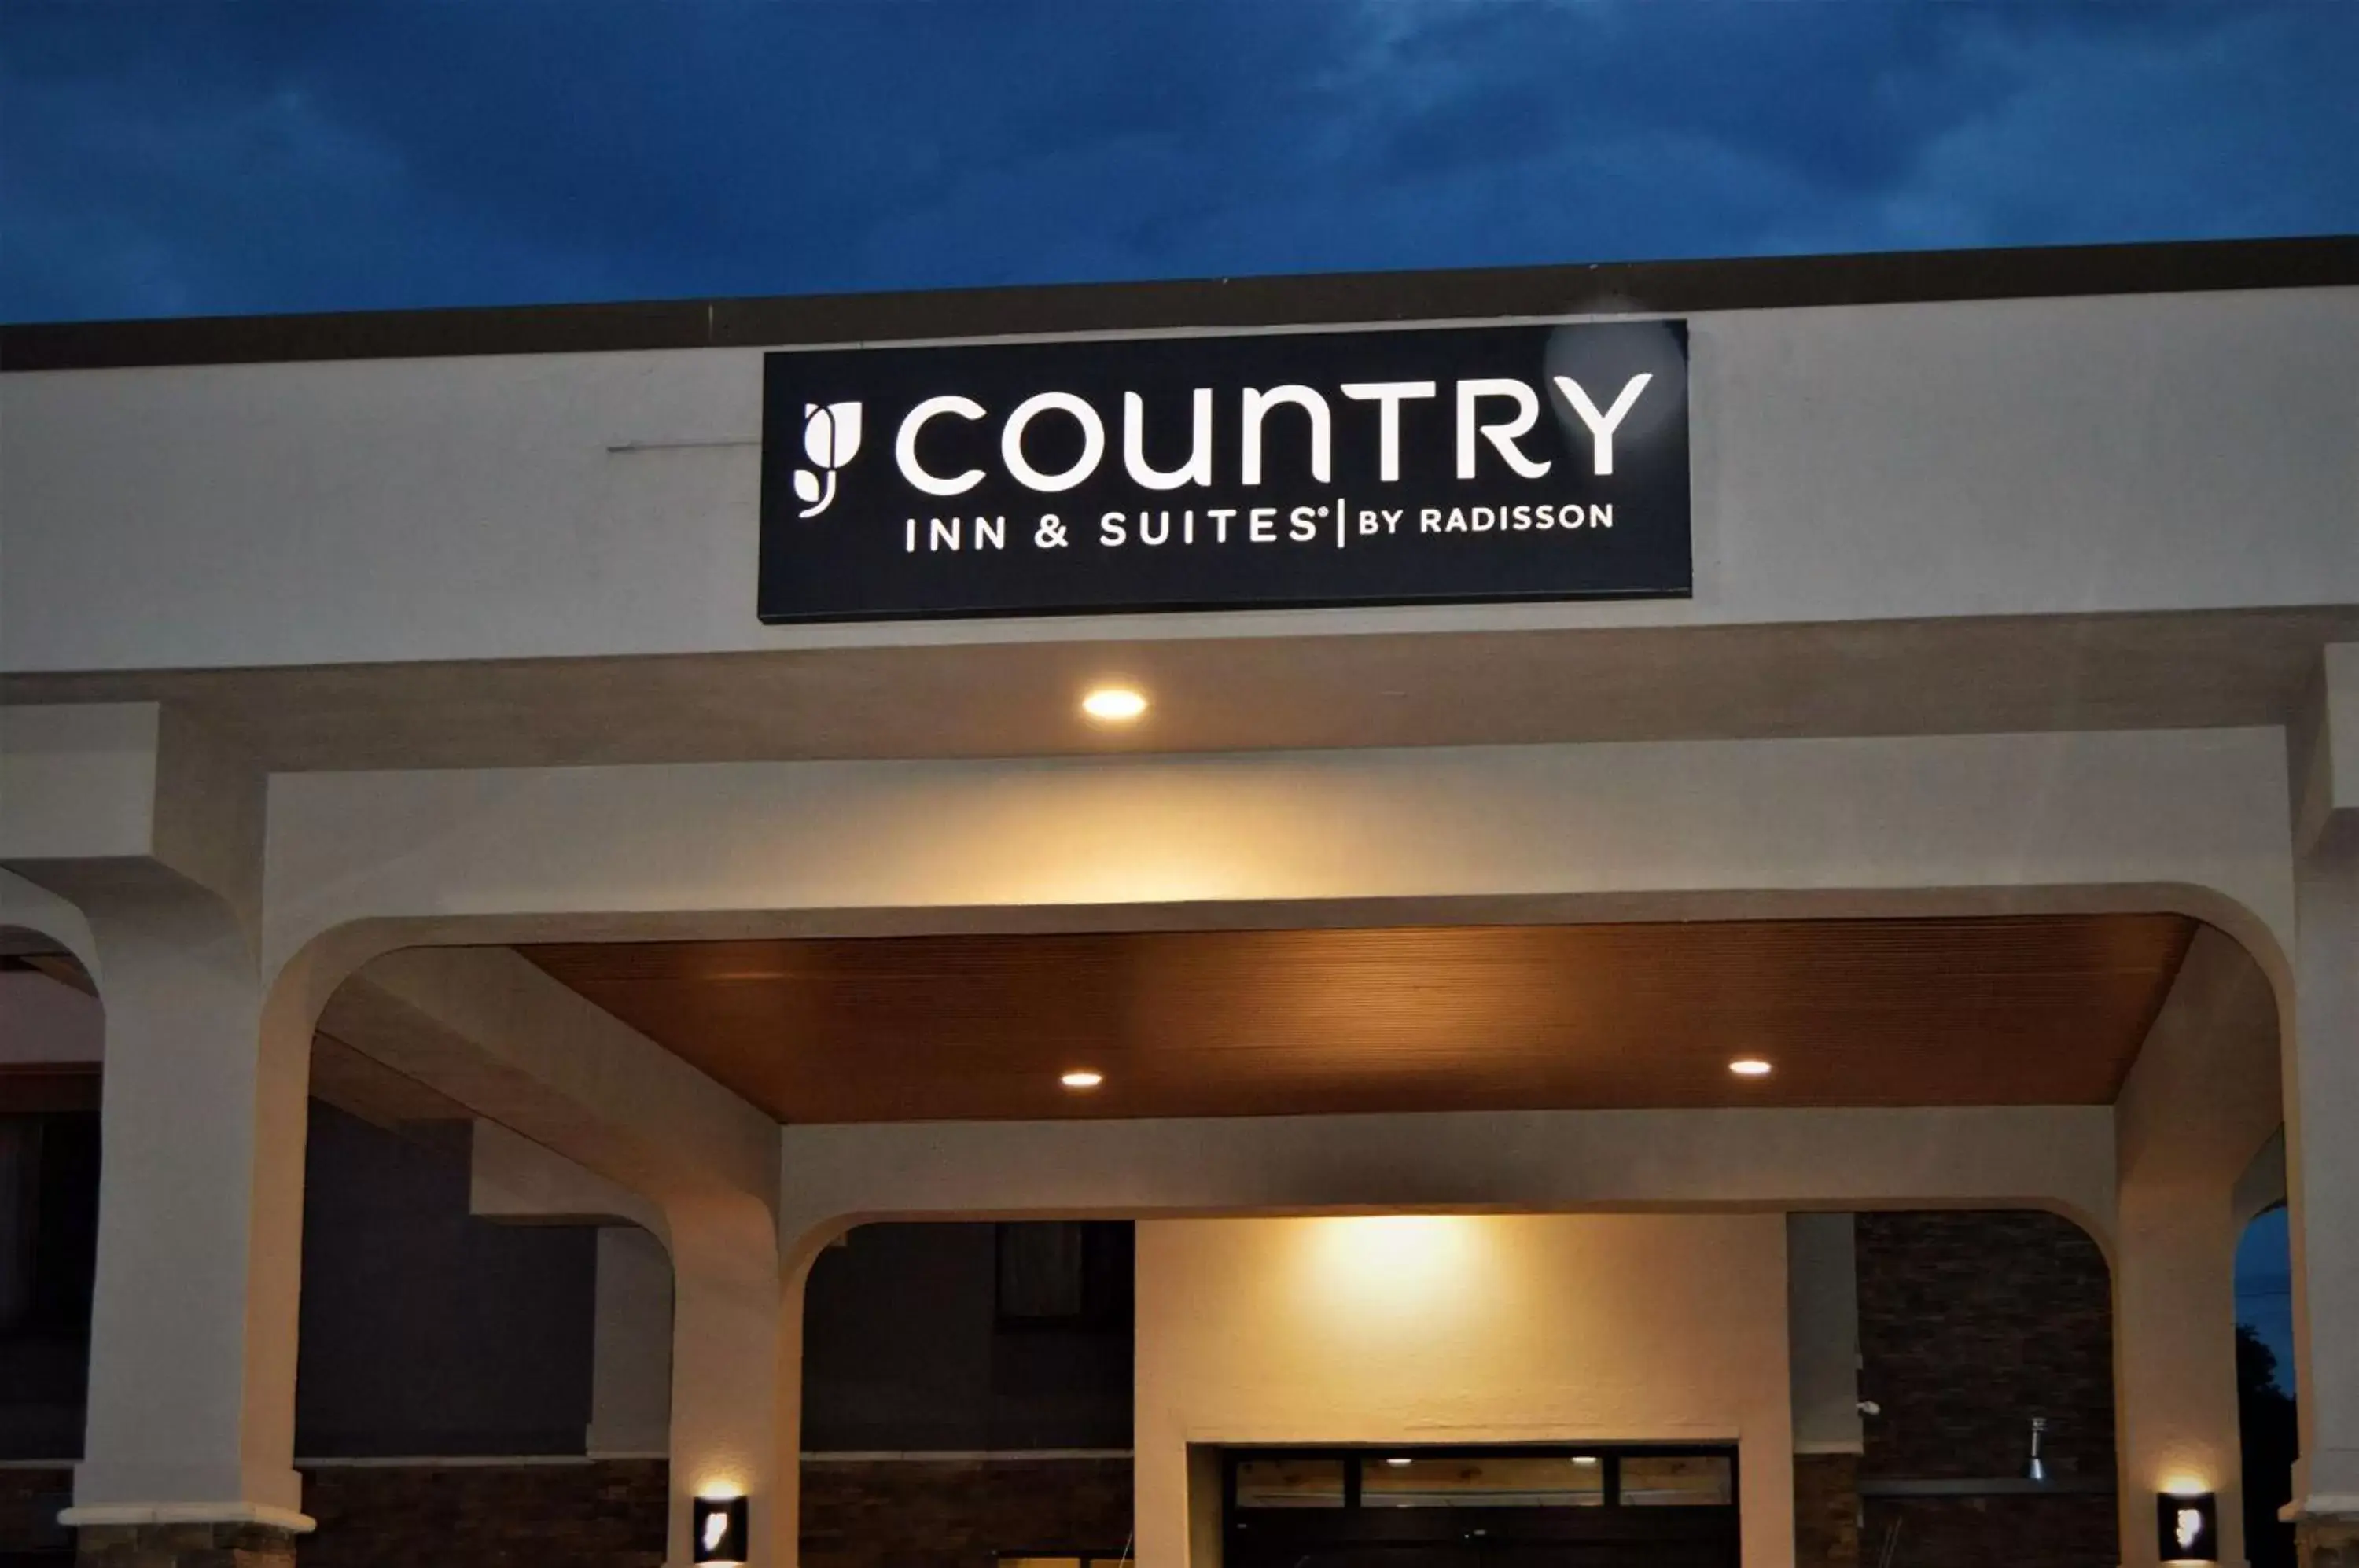 Property building in Country Inn & Suites by Radisson, La Crosse, WI